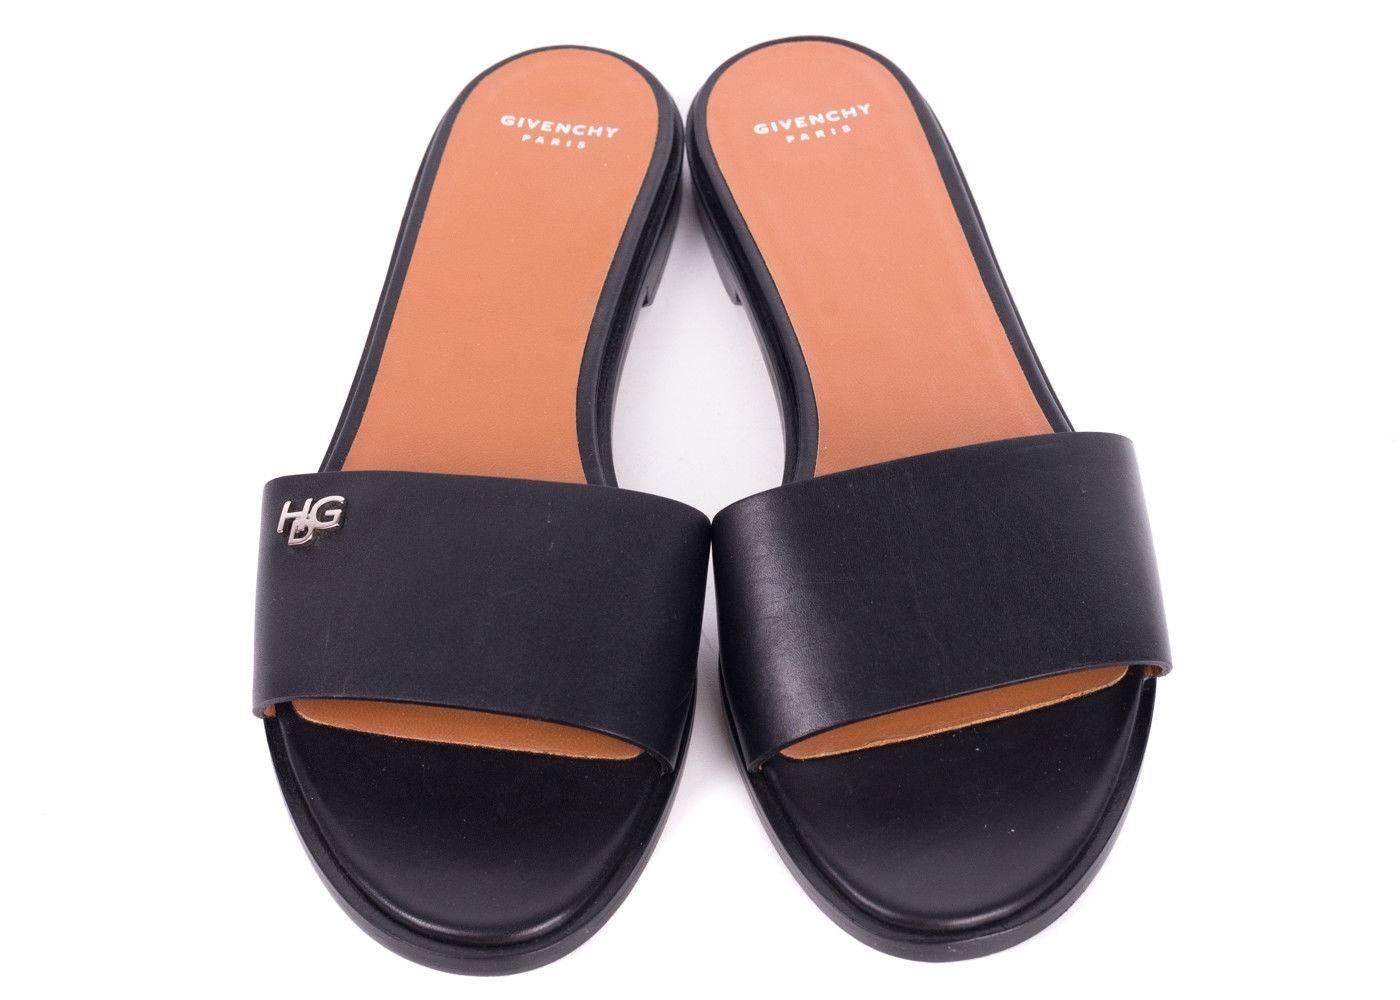 Strut in style with cool-chic elegance courtesy of Givenchy. This sandal is the ultimate minimalistic, long wearng slide. Featuring a simplistic design, highlighted by rich Italian leather and silver tone HDG symbol. Givenchy bridges this simple